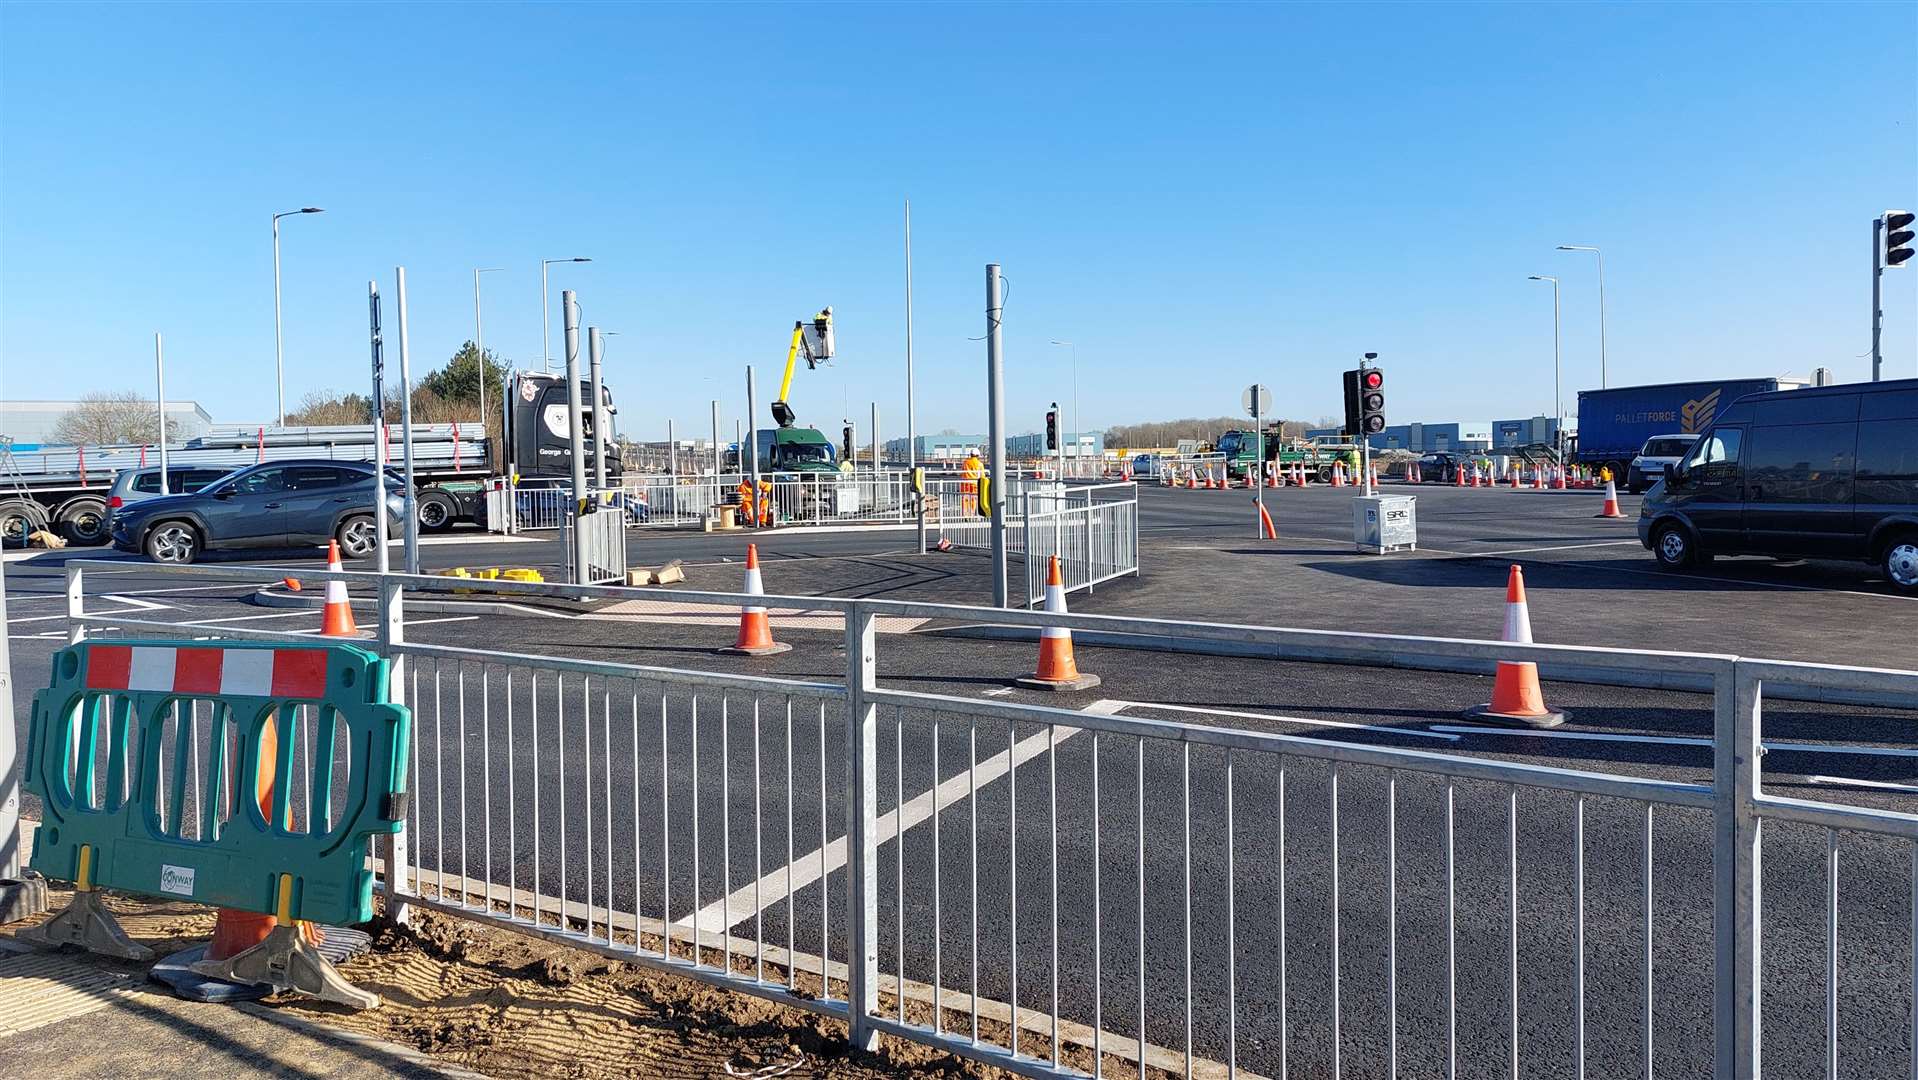 Some lanes are still closed but the 'Bellamy Gurner' junction is taking shape